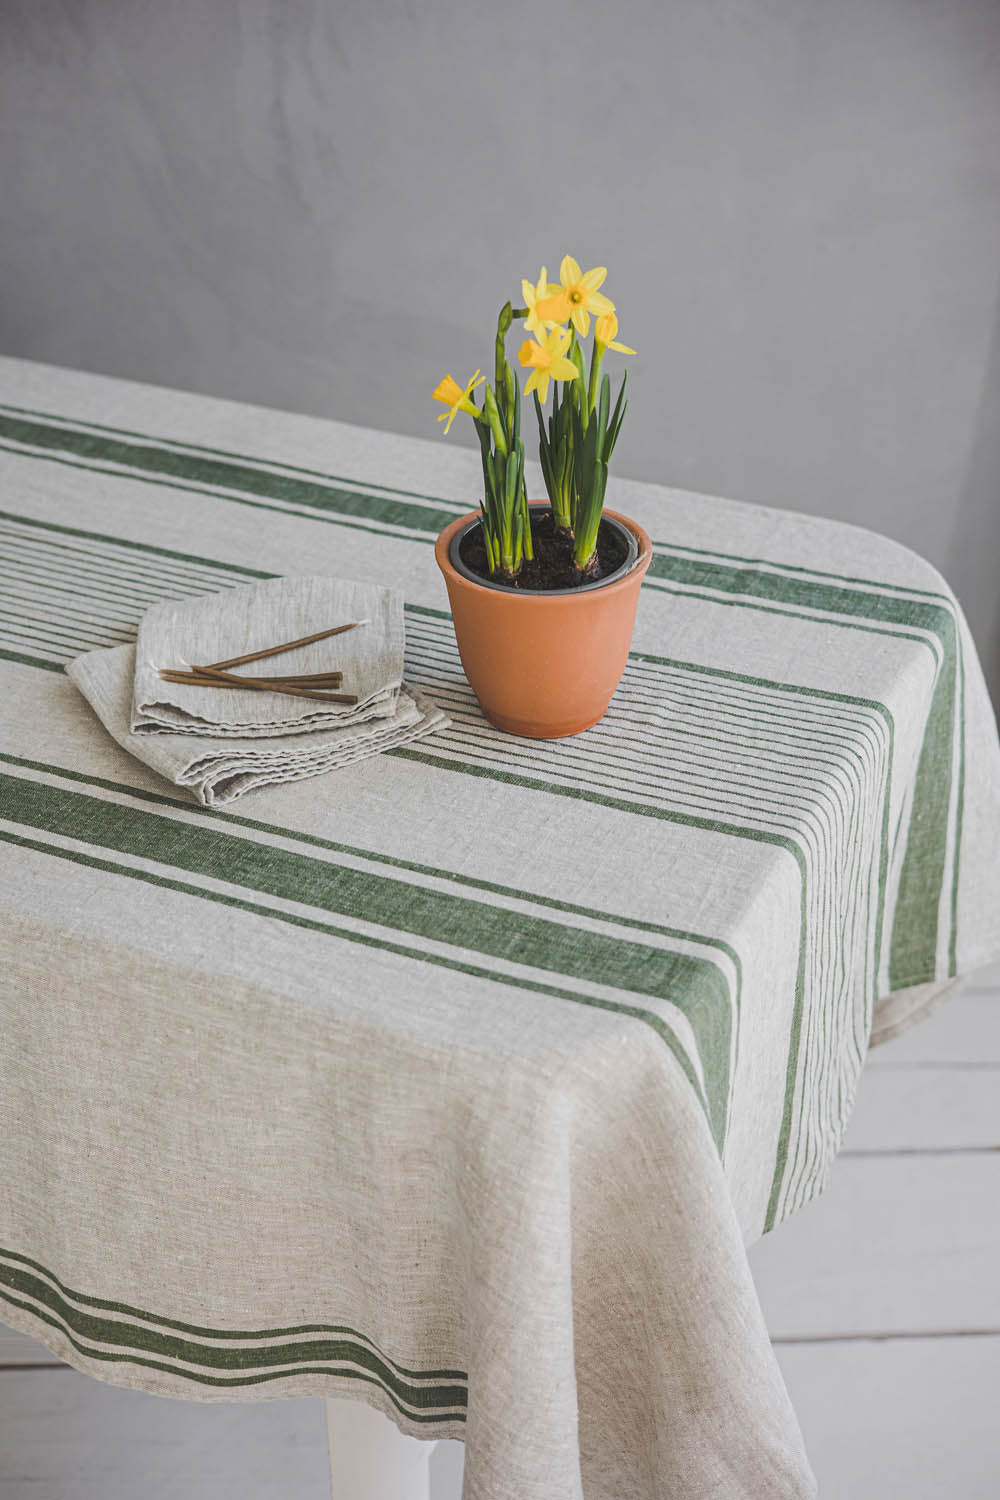 Natural linen napkins from French style linen fabric